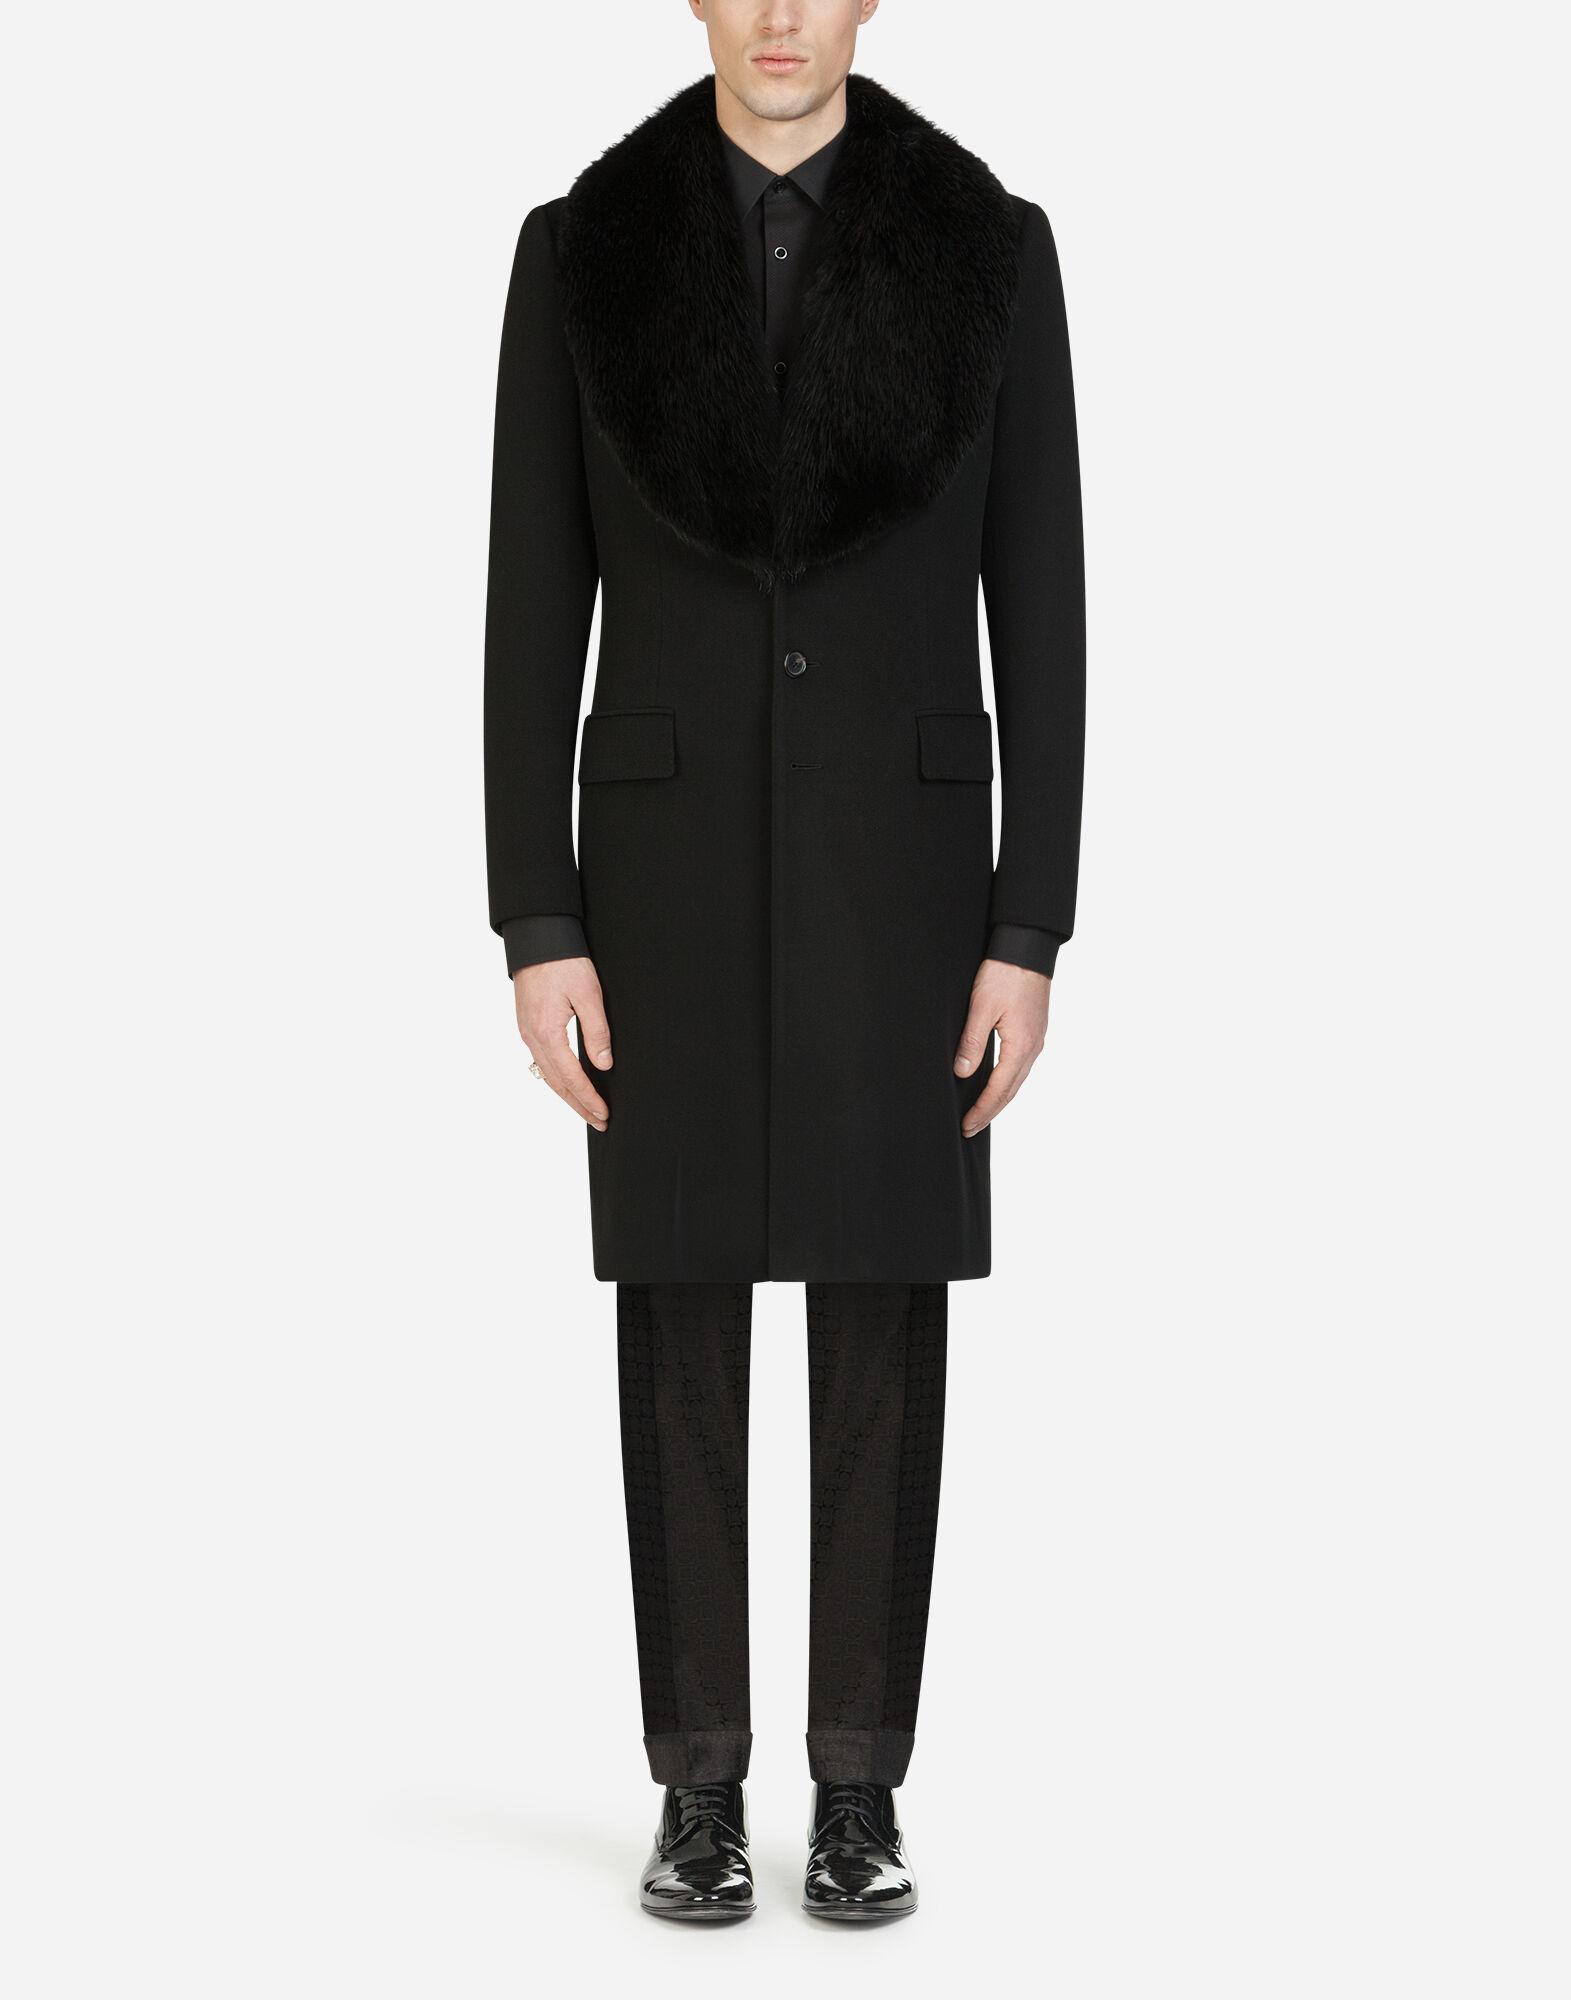 Dolce & Gabbana Wool And Cashmere Broadcloth Coat in Black for Men - Lyst